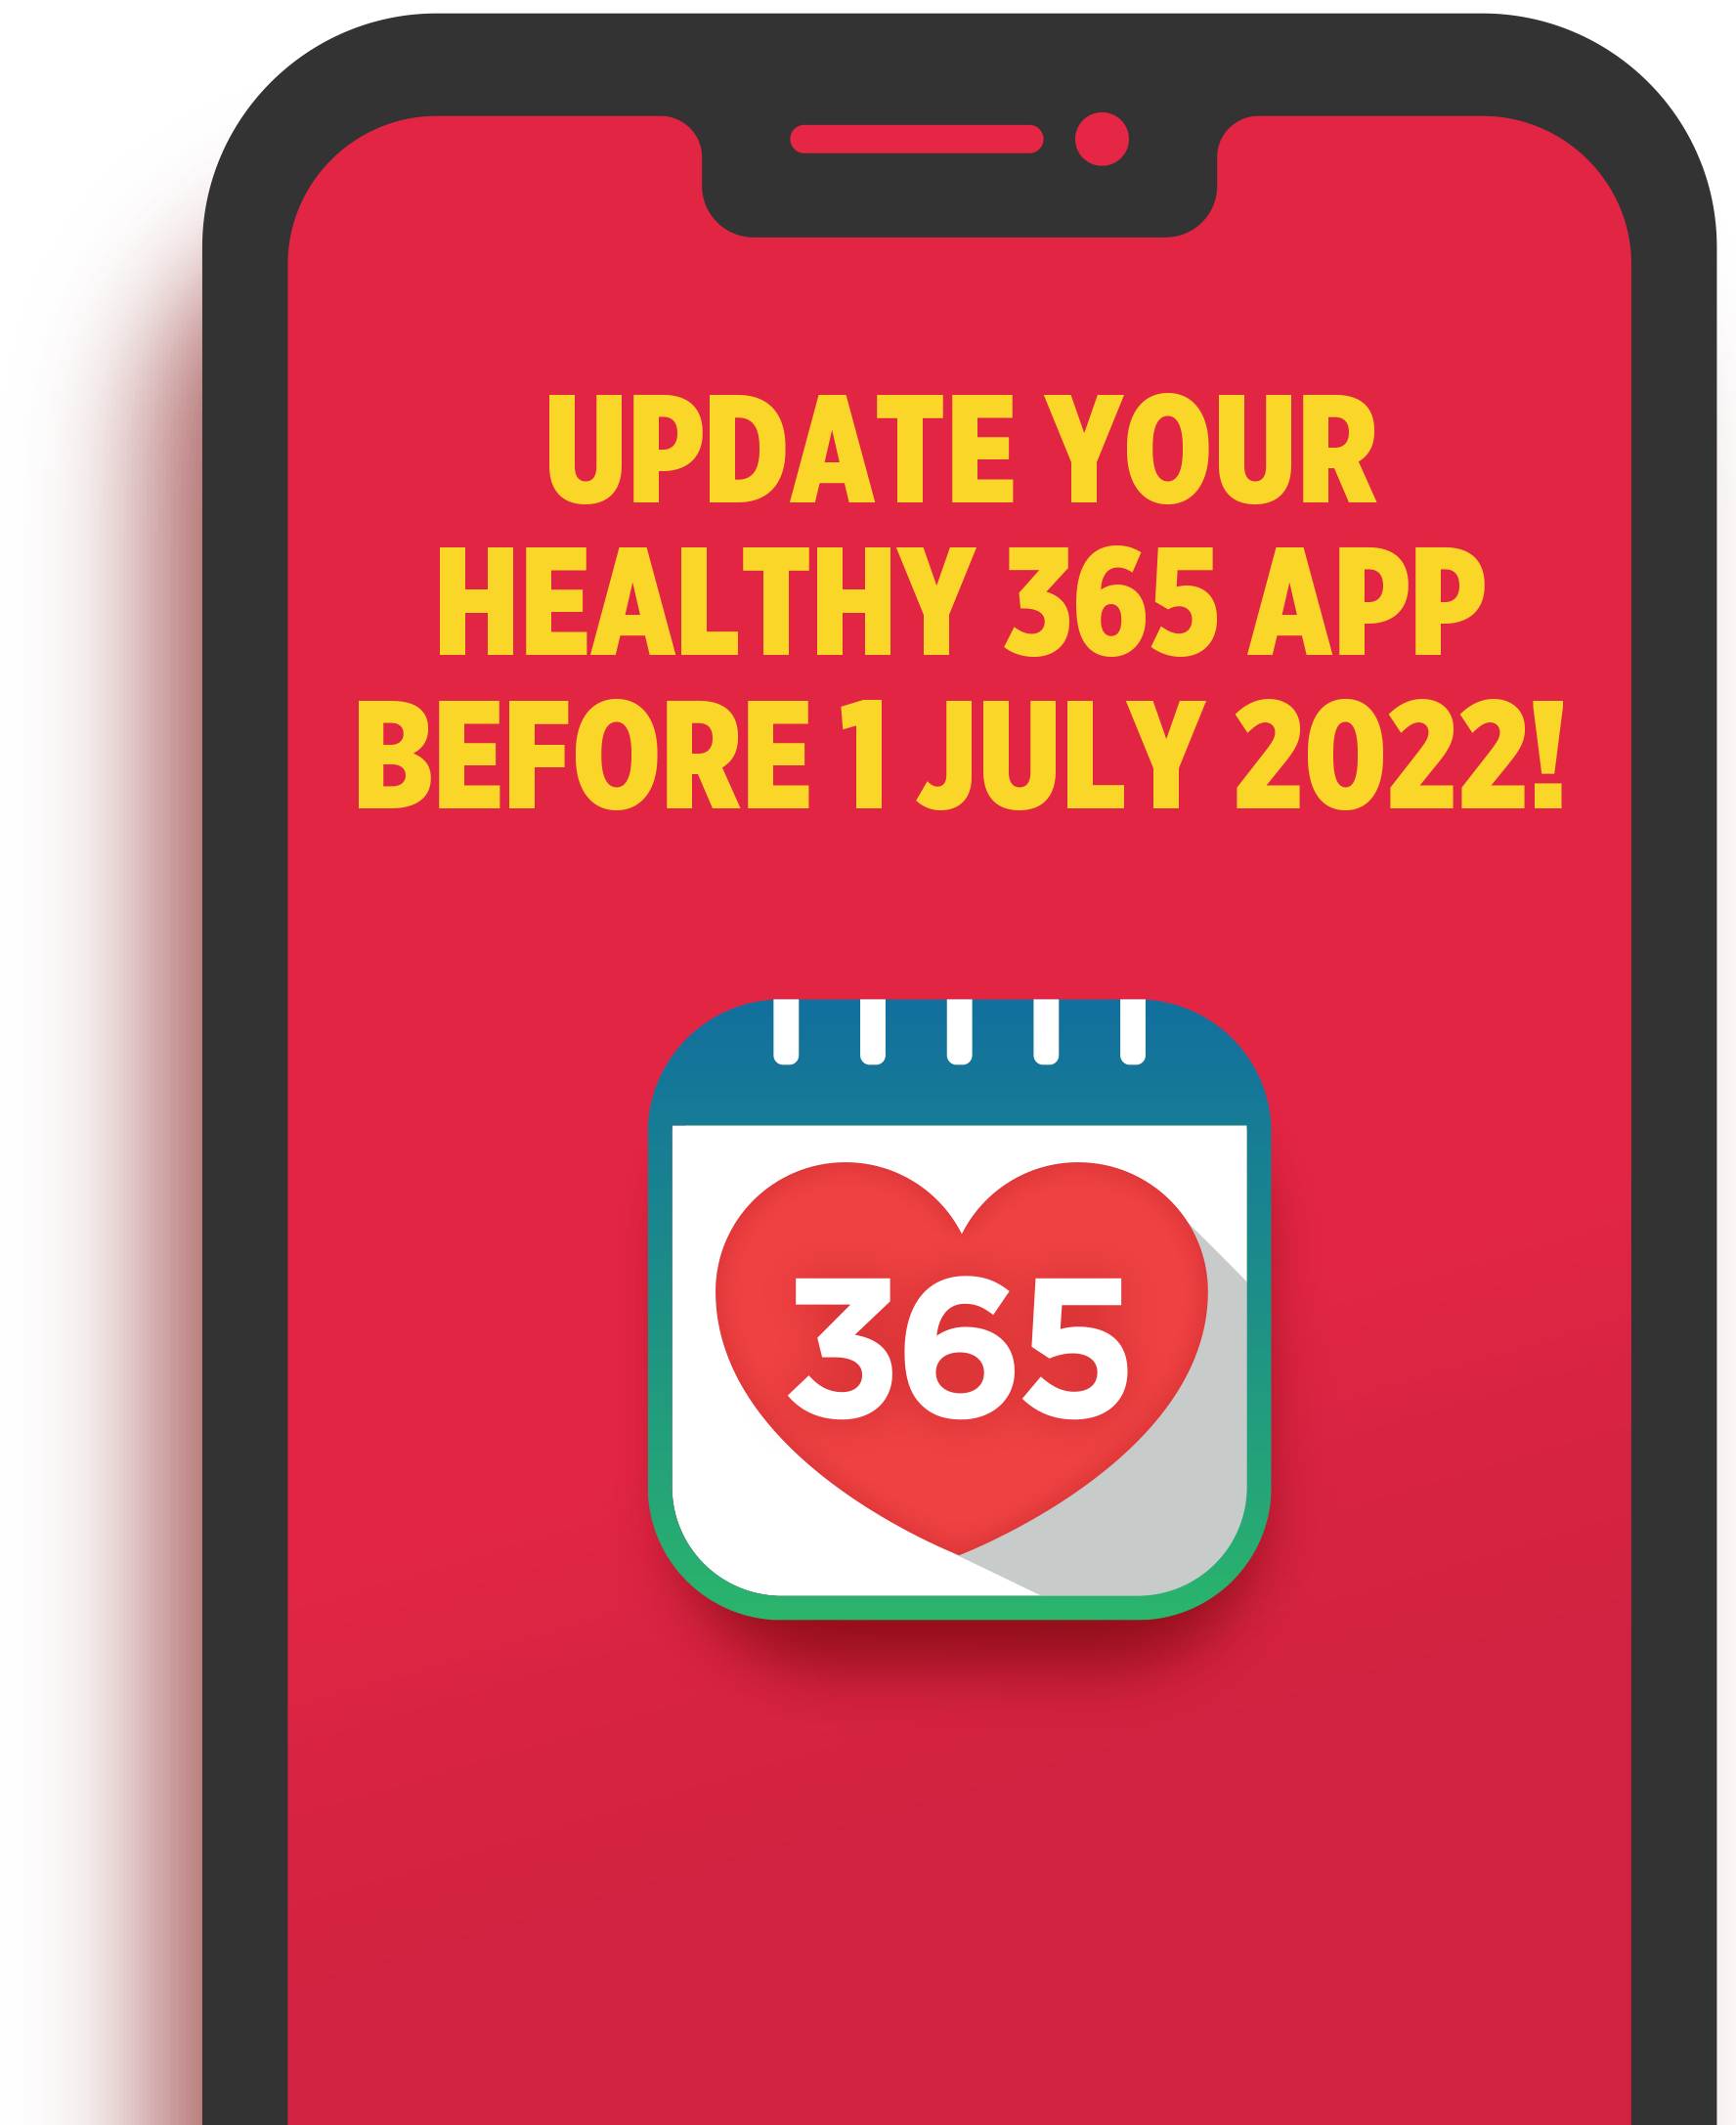 Update your healthy 365 app before 1 July 2022!